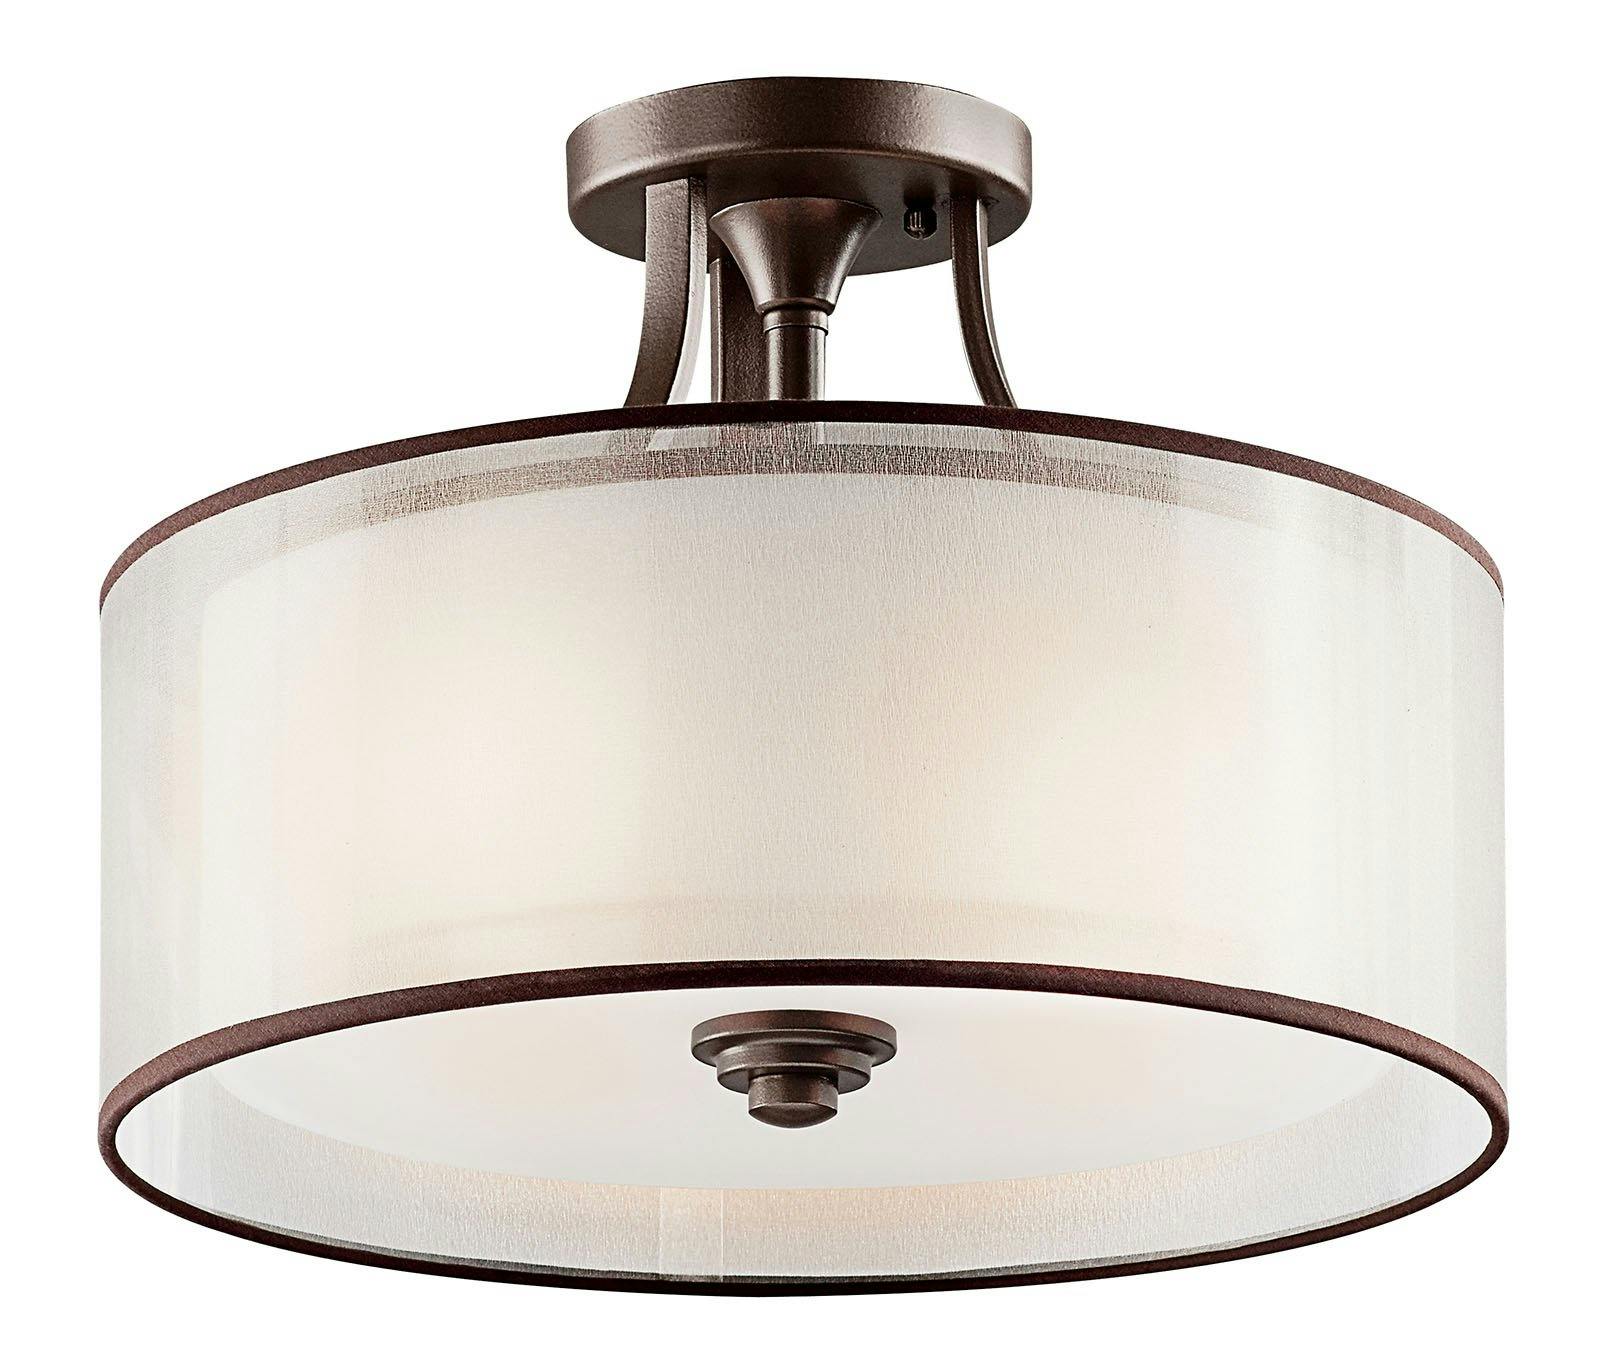 Lacey 15" 3 Light Semi Flush in Bronze on a white background